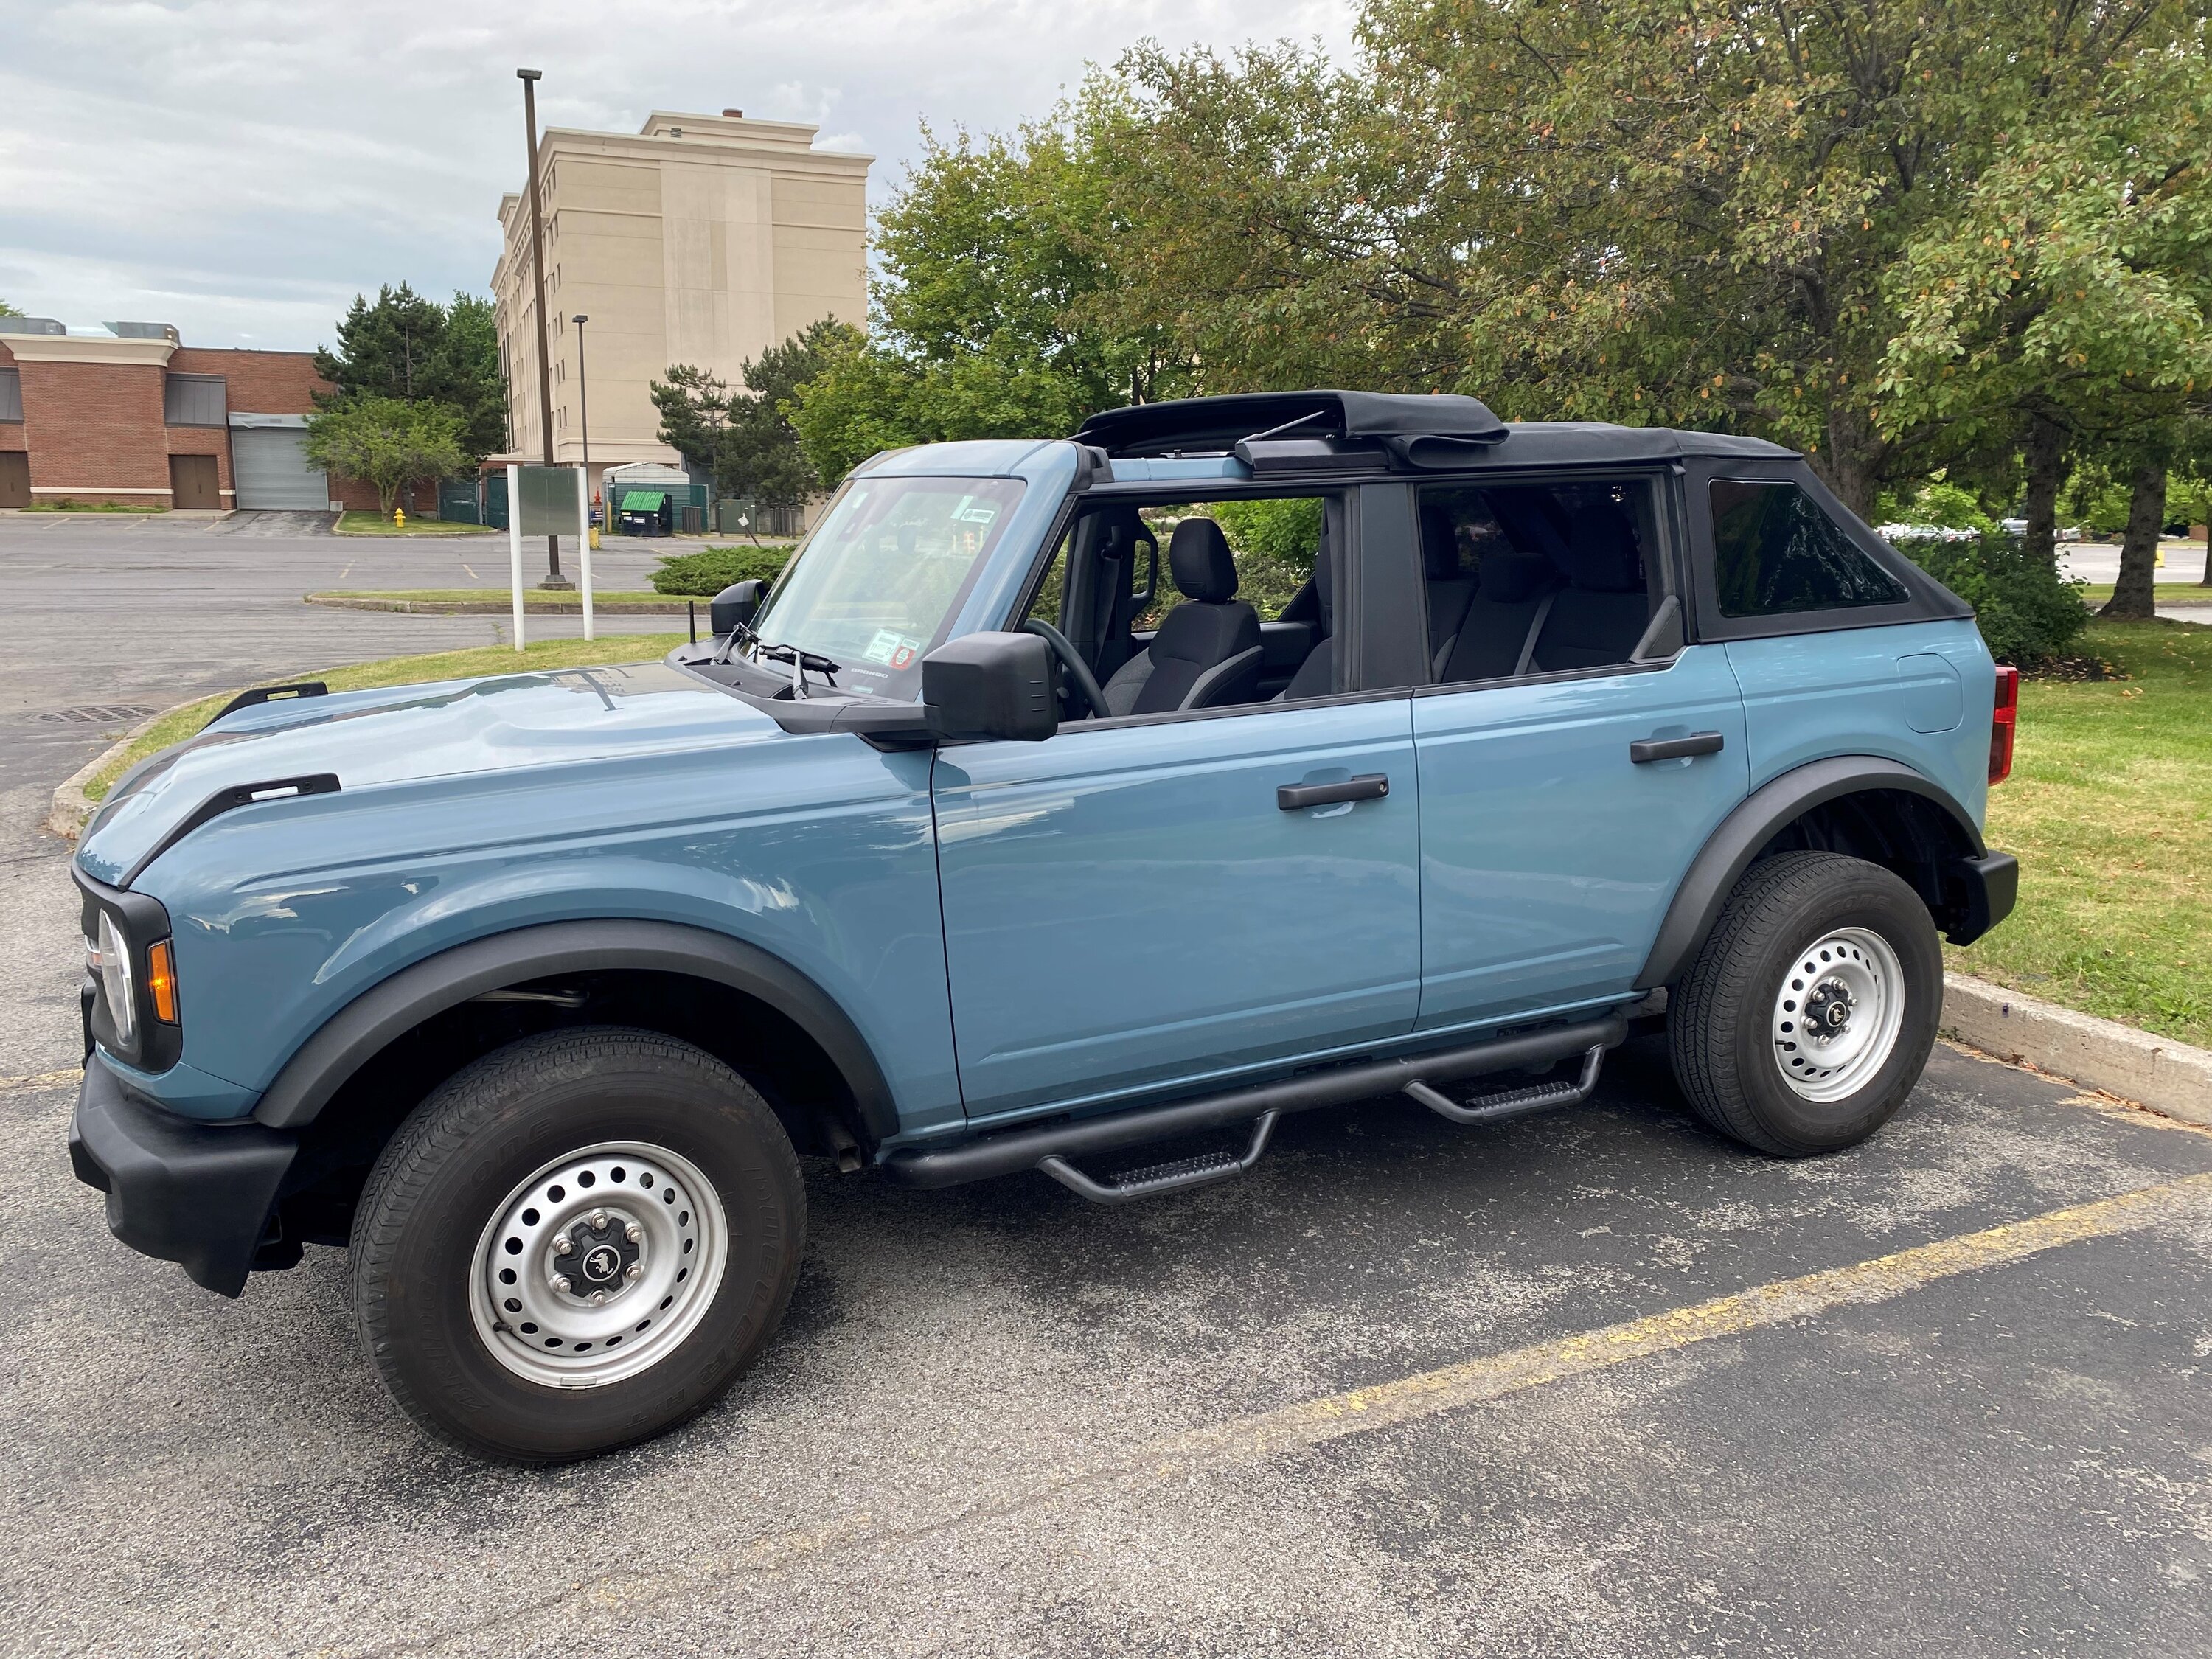 Ford Bronco Rampage TrailView Fastback Soft Top for 2 door Bronco -- installed first impressions & photos ram